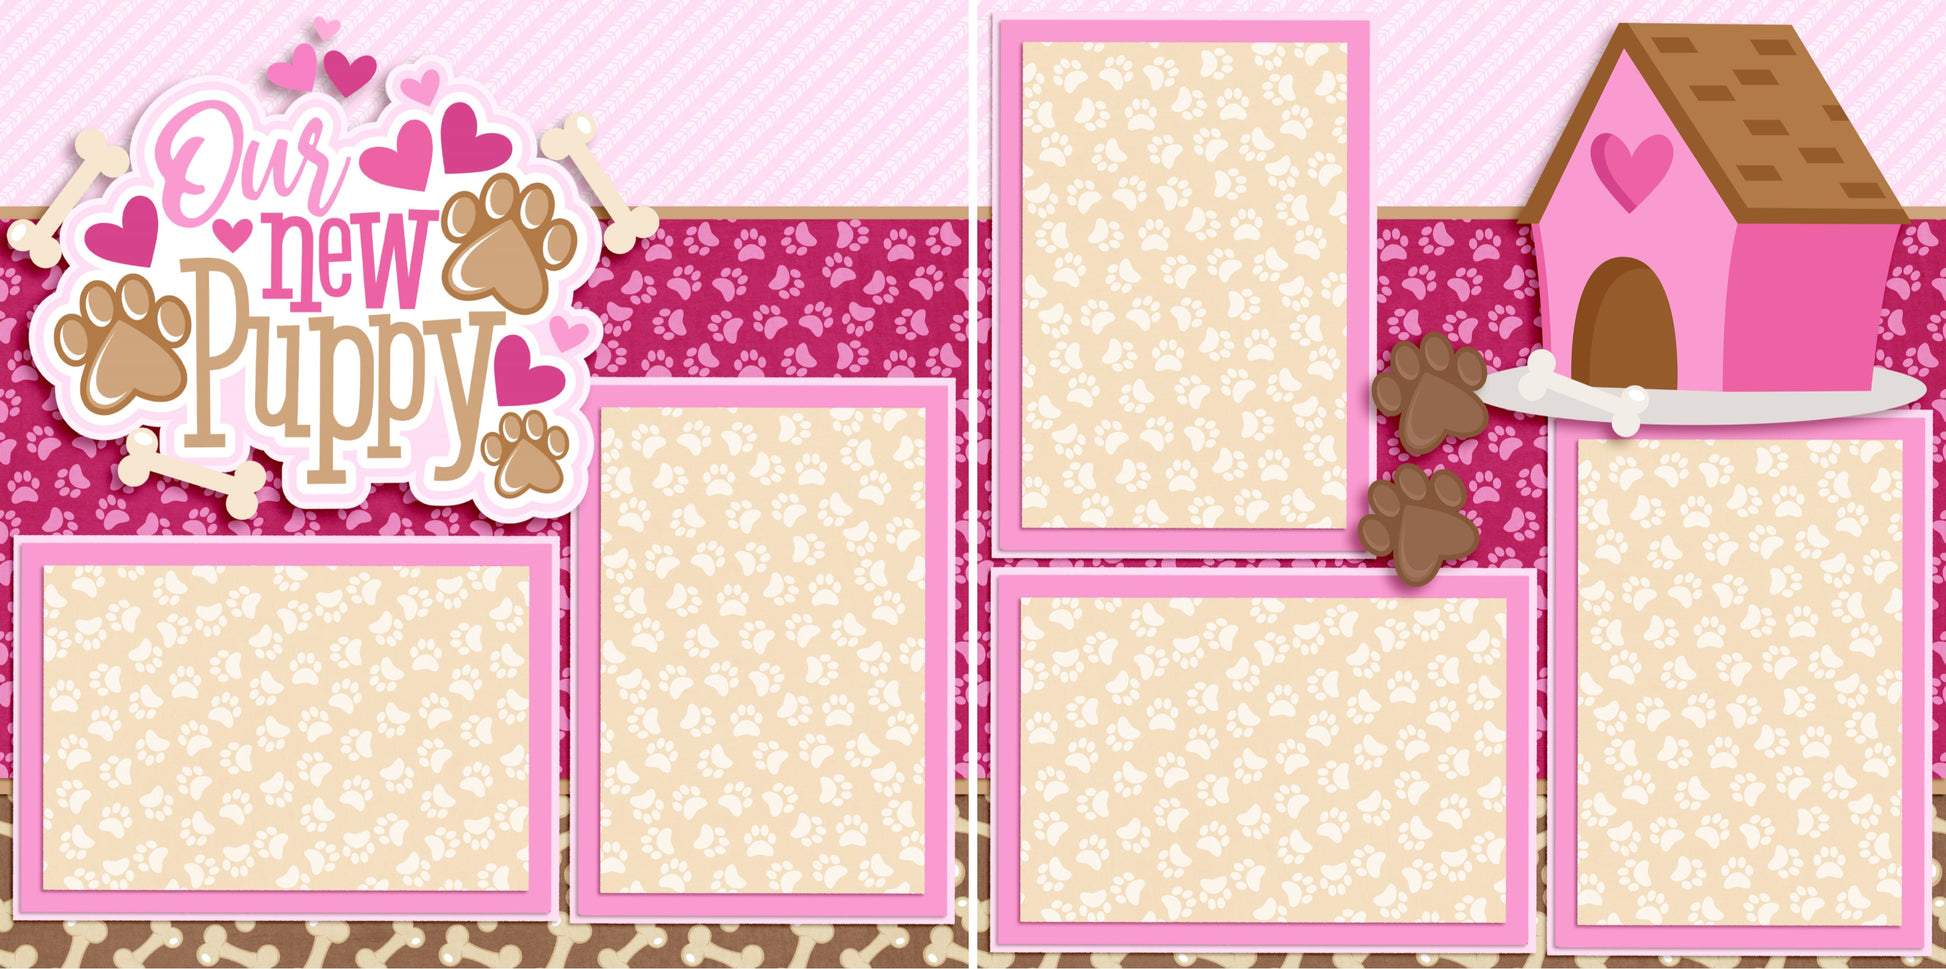 Our New Puppy Pink - 4028 - EZscrapbooks Scrapbook Layouts dogs, Pets